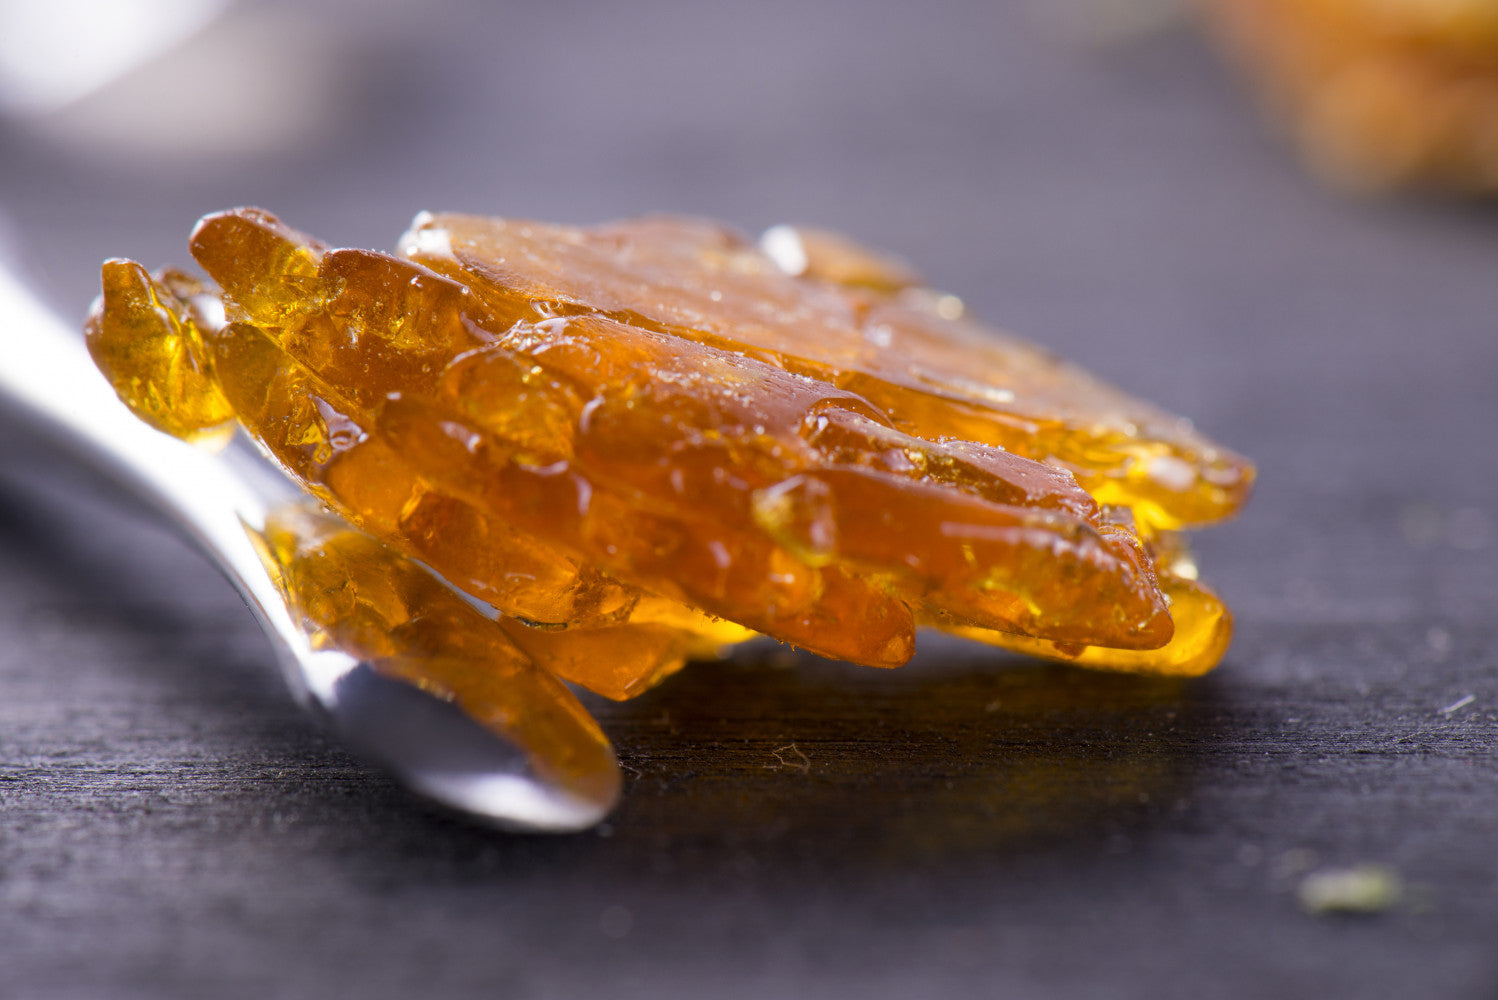 Wax Dabs & Dab Shatter: Cannabis Concentrates Explained